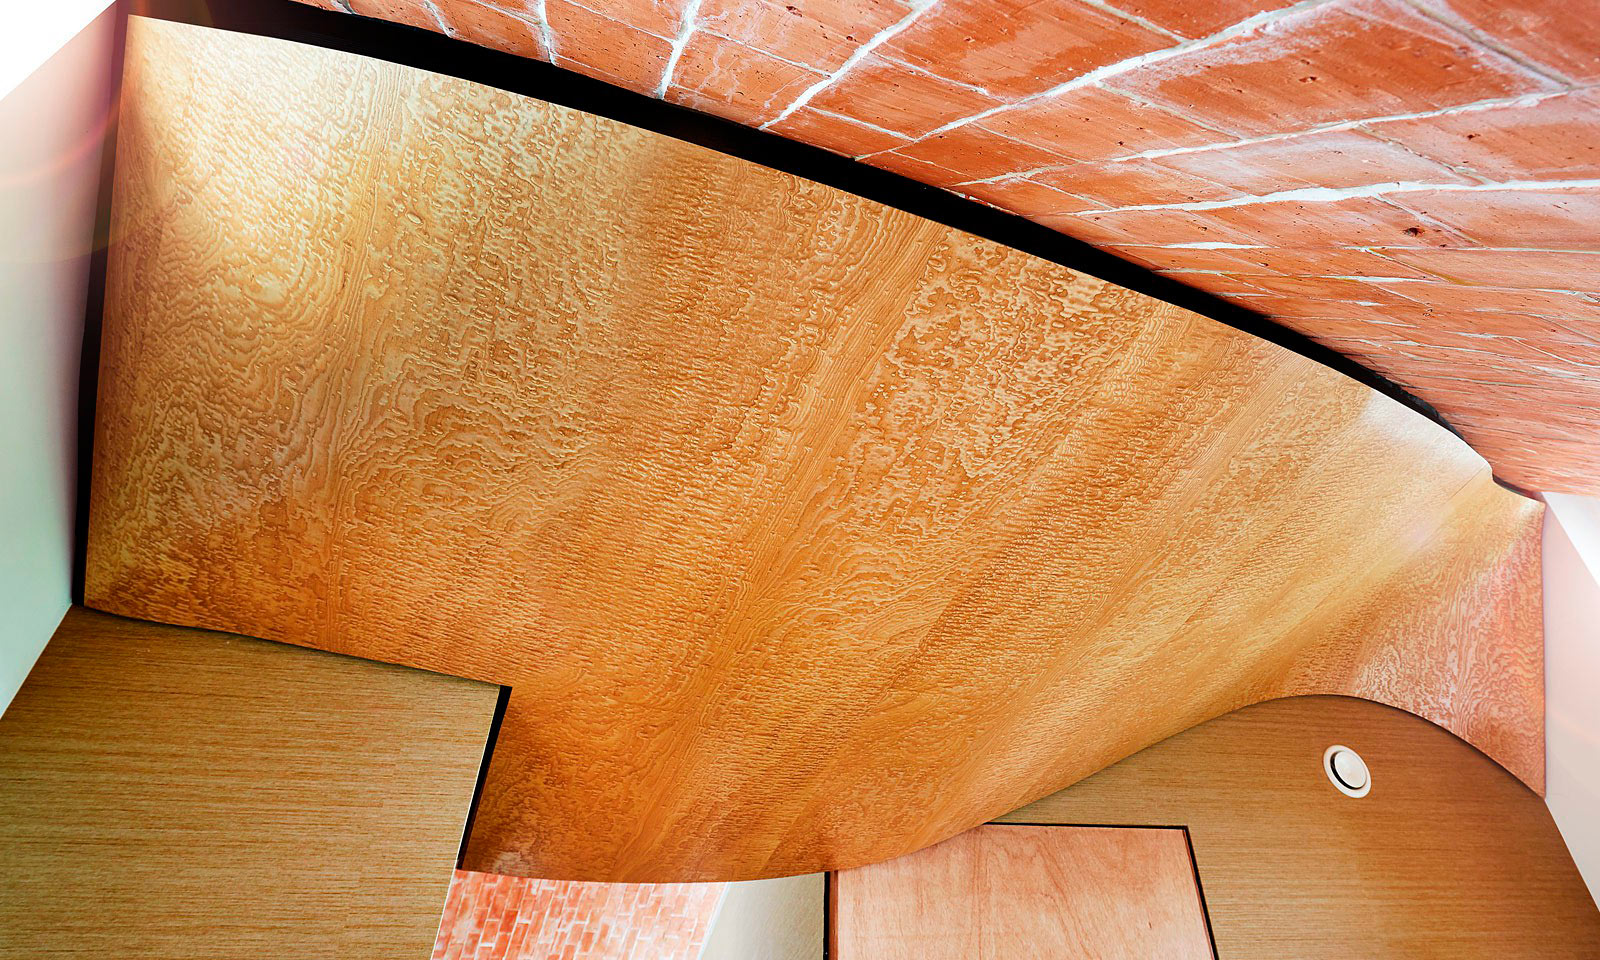 Verity's ceiling. A bespoke hand-crafted, timber ceiling, designed for Crossway, Hawkes Architect's para 55 eco-house. Featured on Grand Designs this unique stucture was manufactured from veneered Japanese birds eye ash and installed by the skilled joiners from Mounts Hill Woodcraf